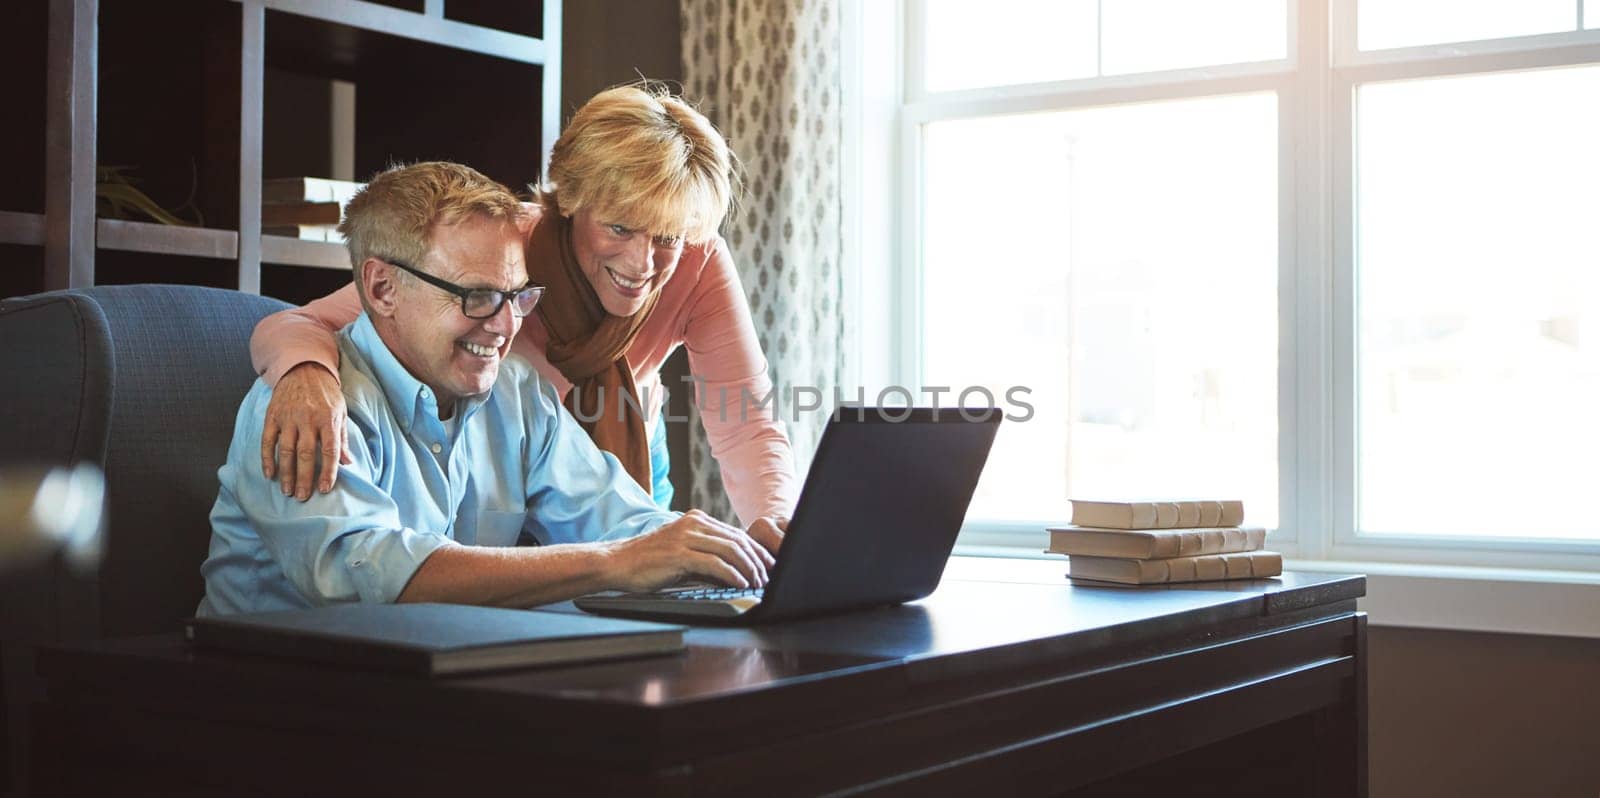 We have more than enough money for retirement. a mature woman keeping her husband company while he works from home